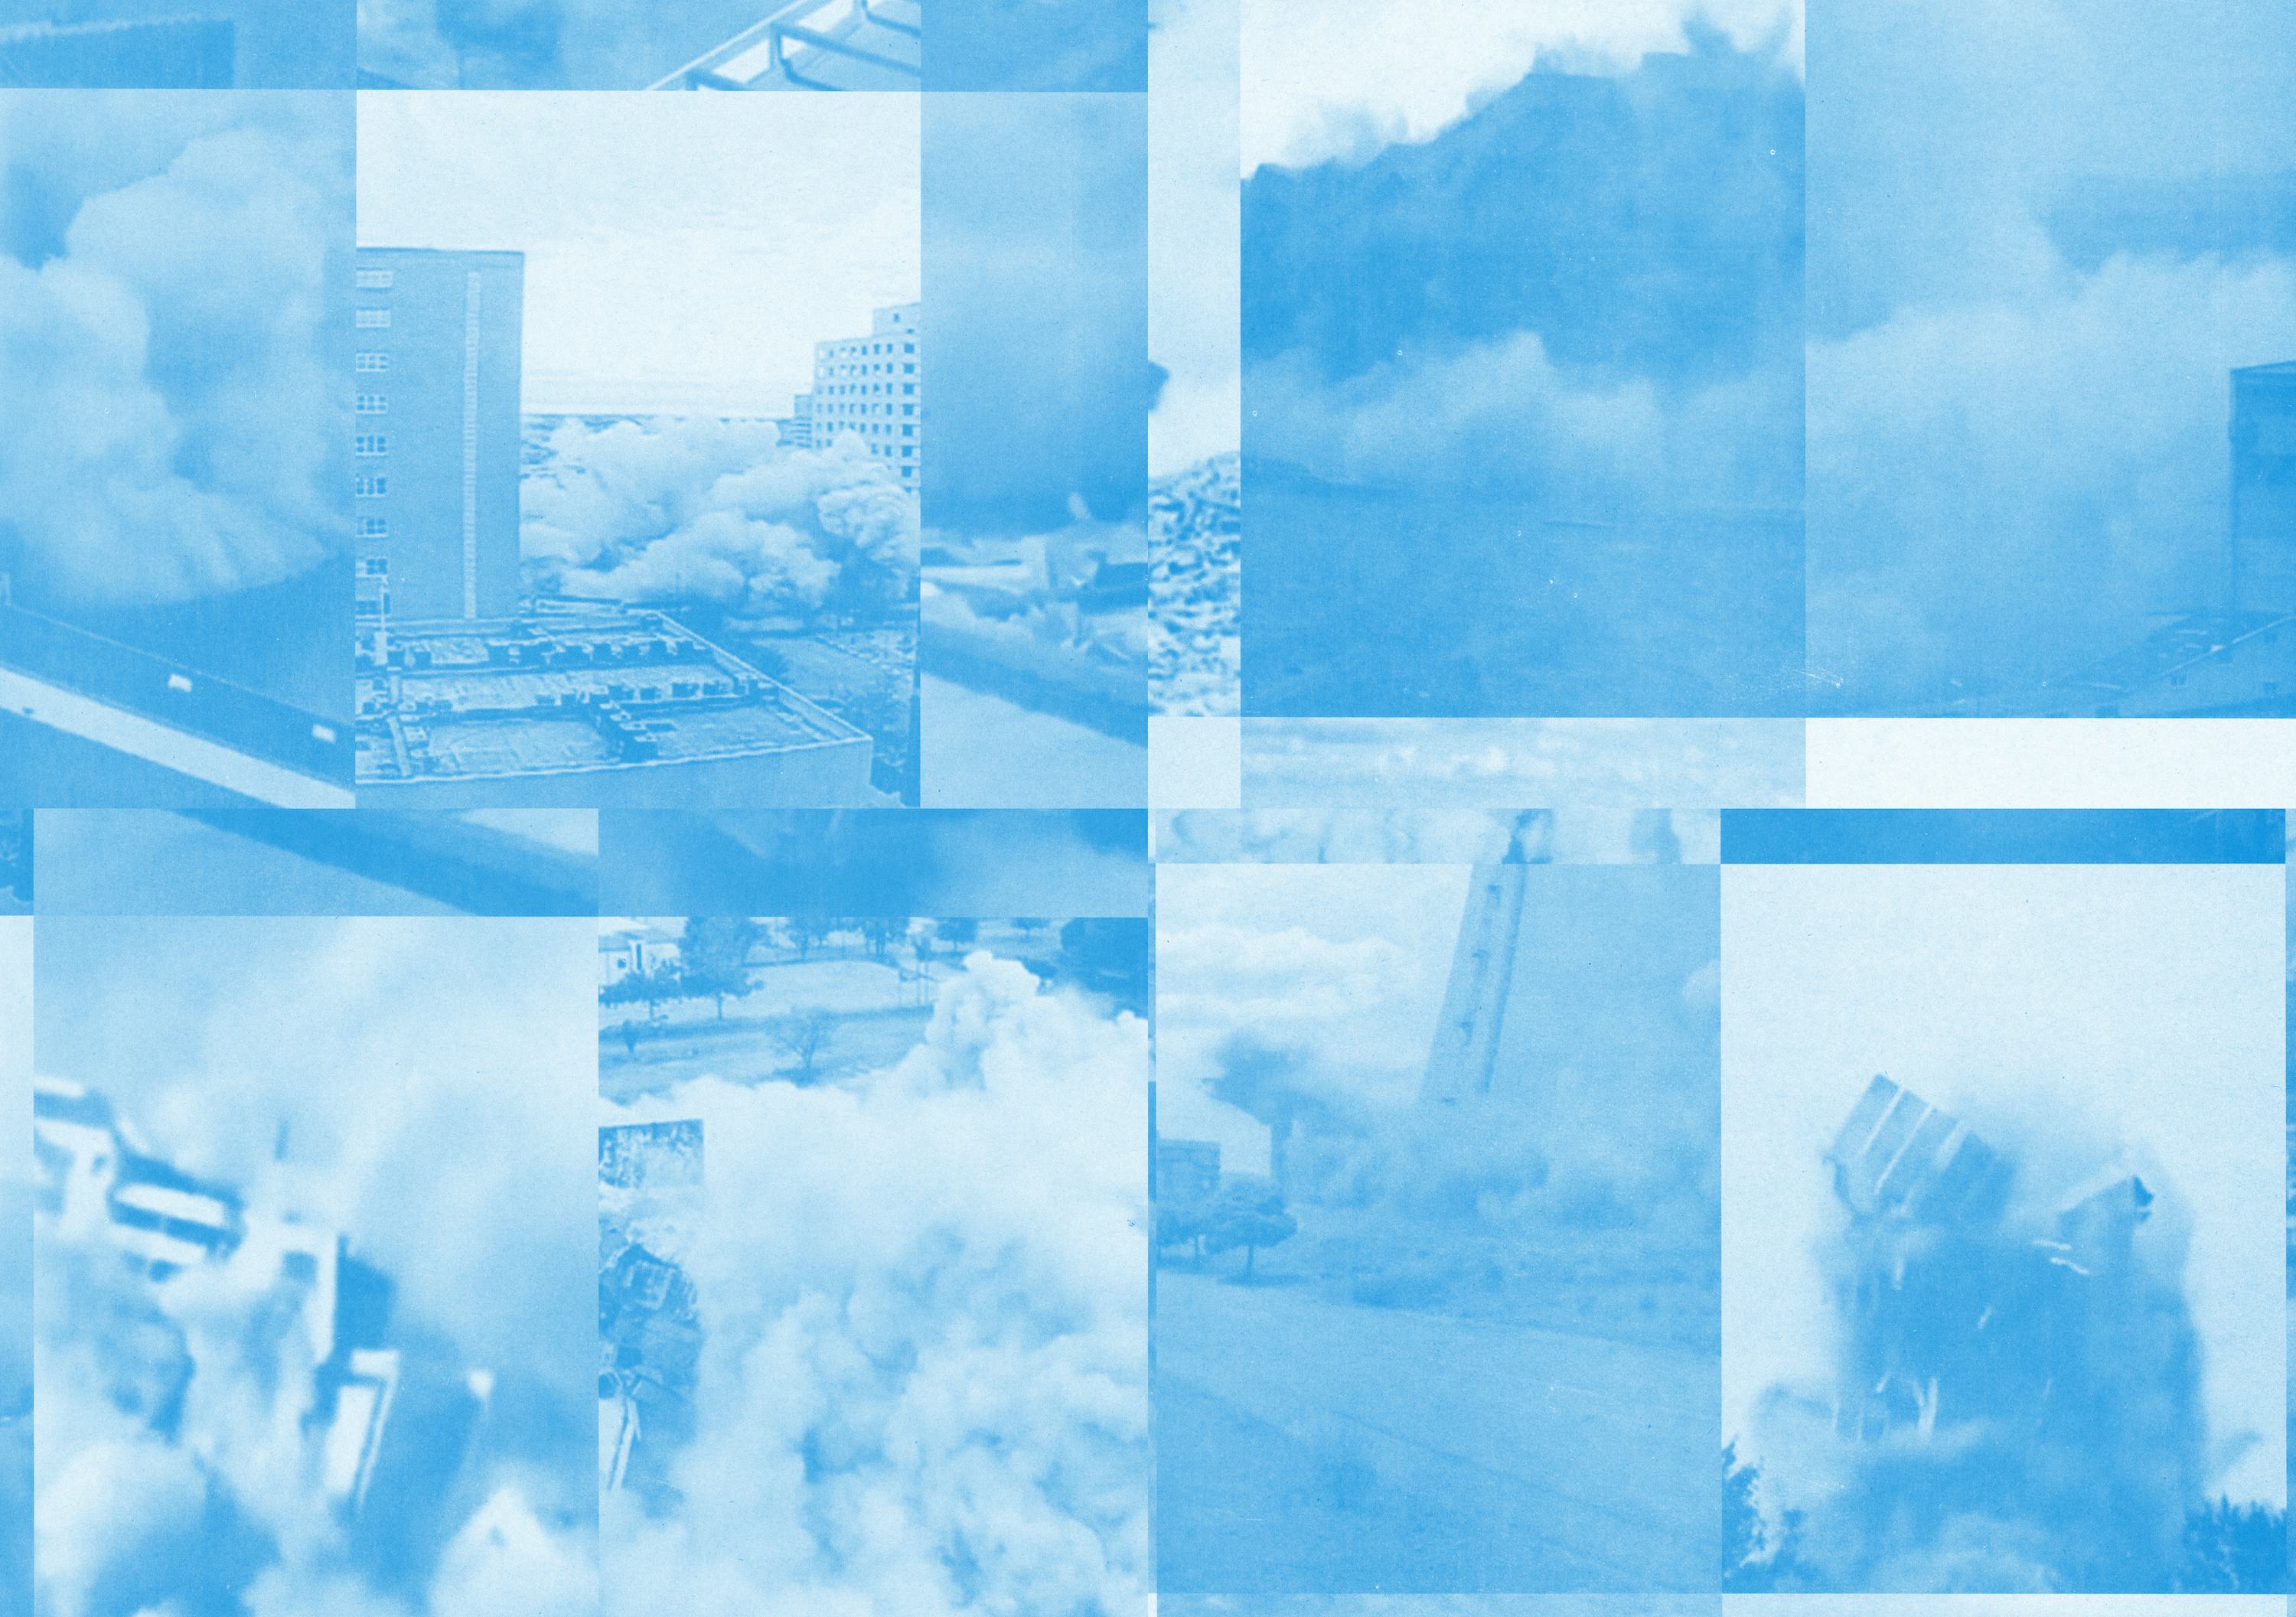 Cyanotype collage of collapsing buildings